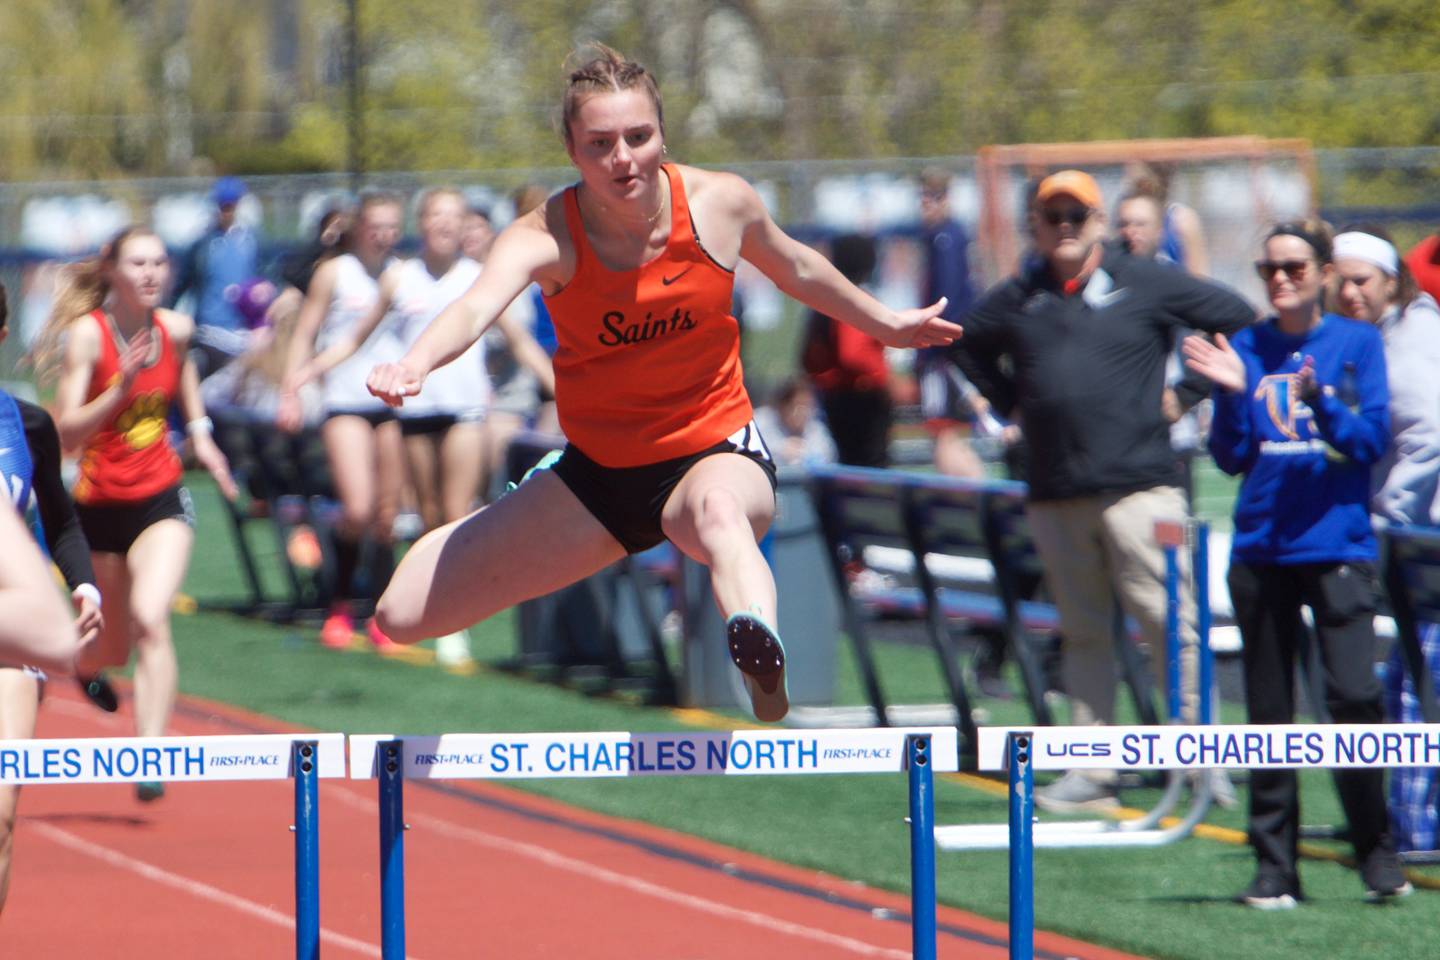 St. Charles East's Katie Kempff competes in the 300 Meter Hurdles at the DuKane Girl's Conference meet at St. Charles North on May 7, 2022 in St. Charles.